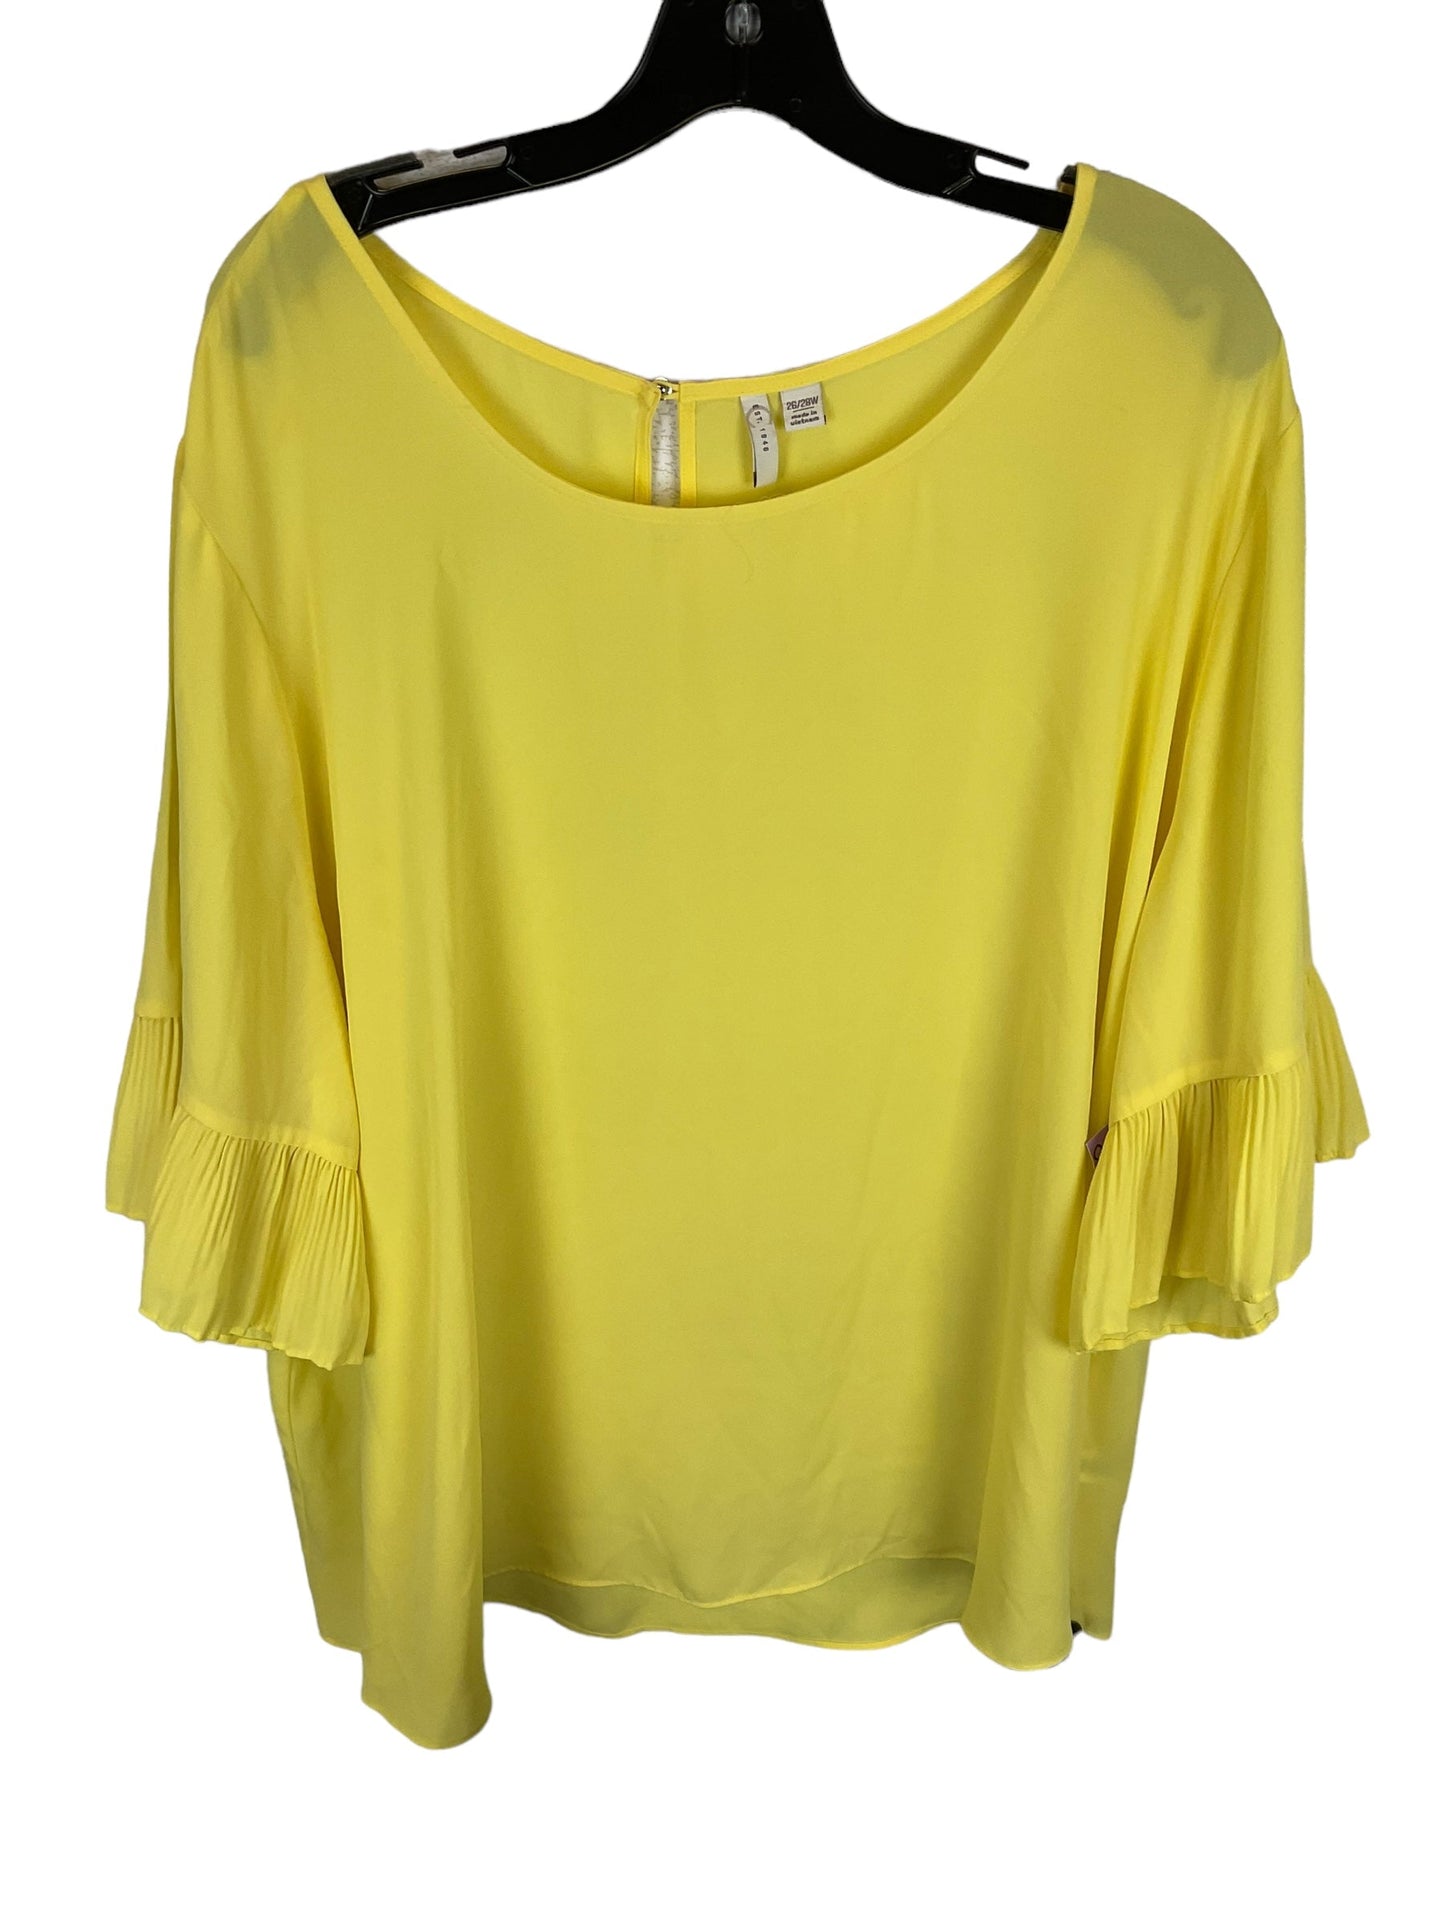 Yellow Top Short Sleeve Cato, Size 4x